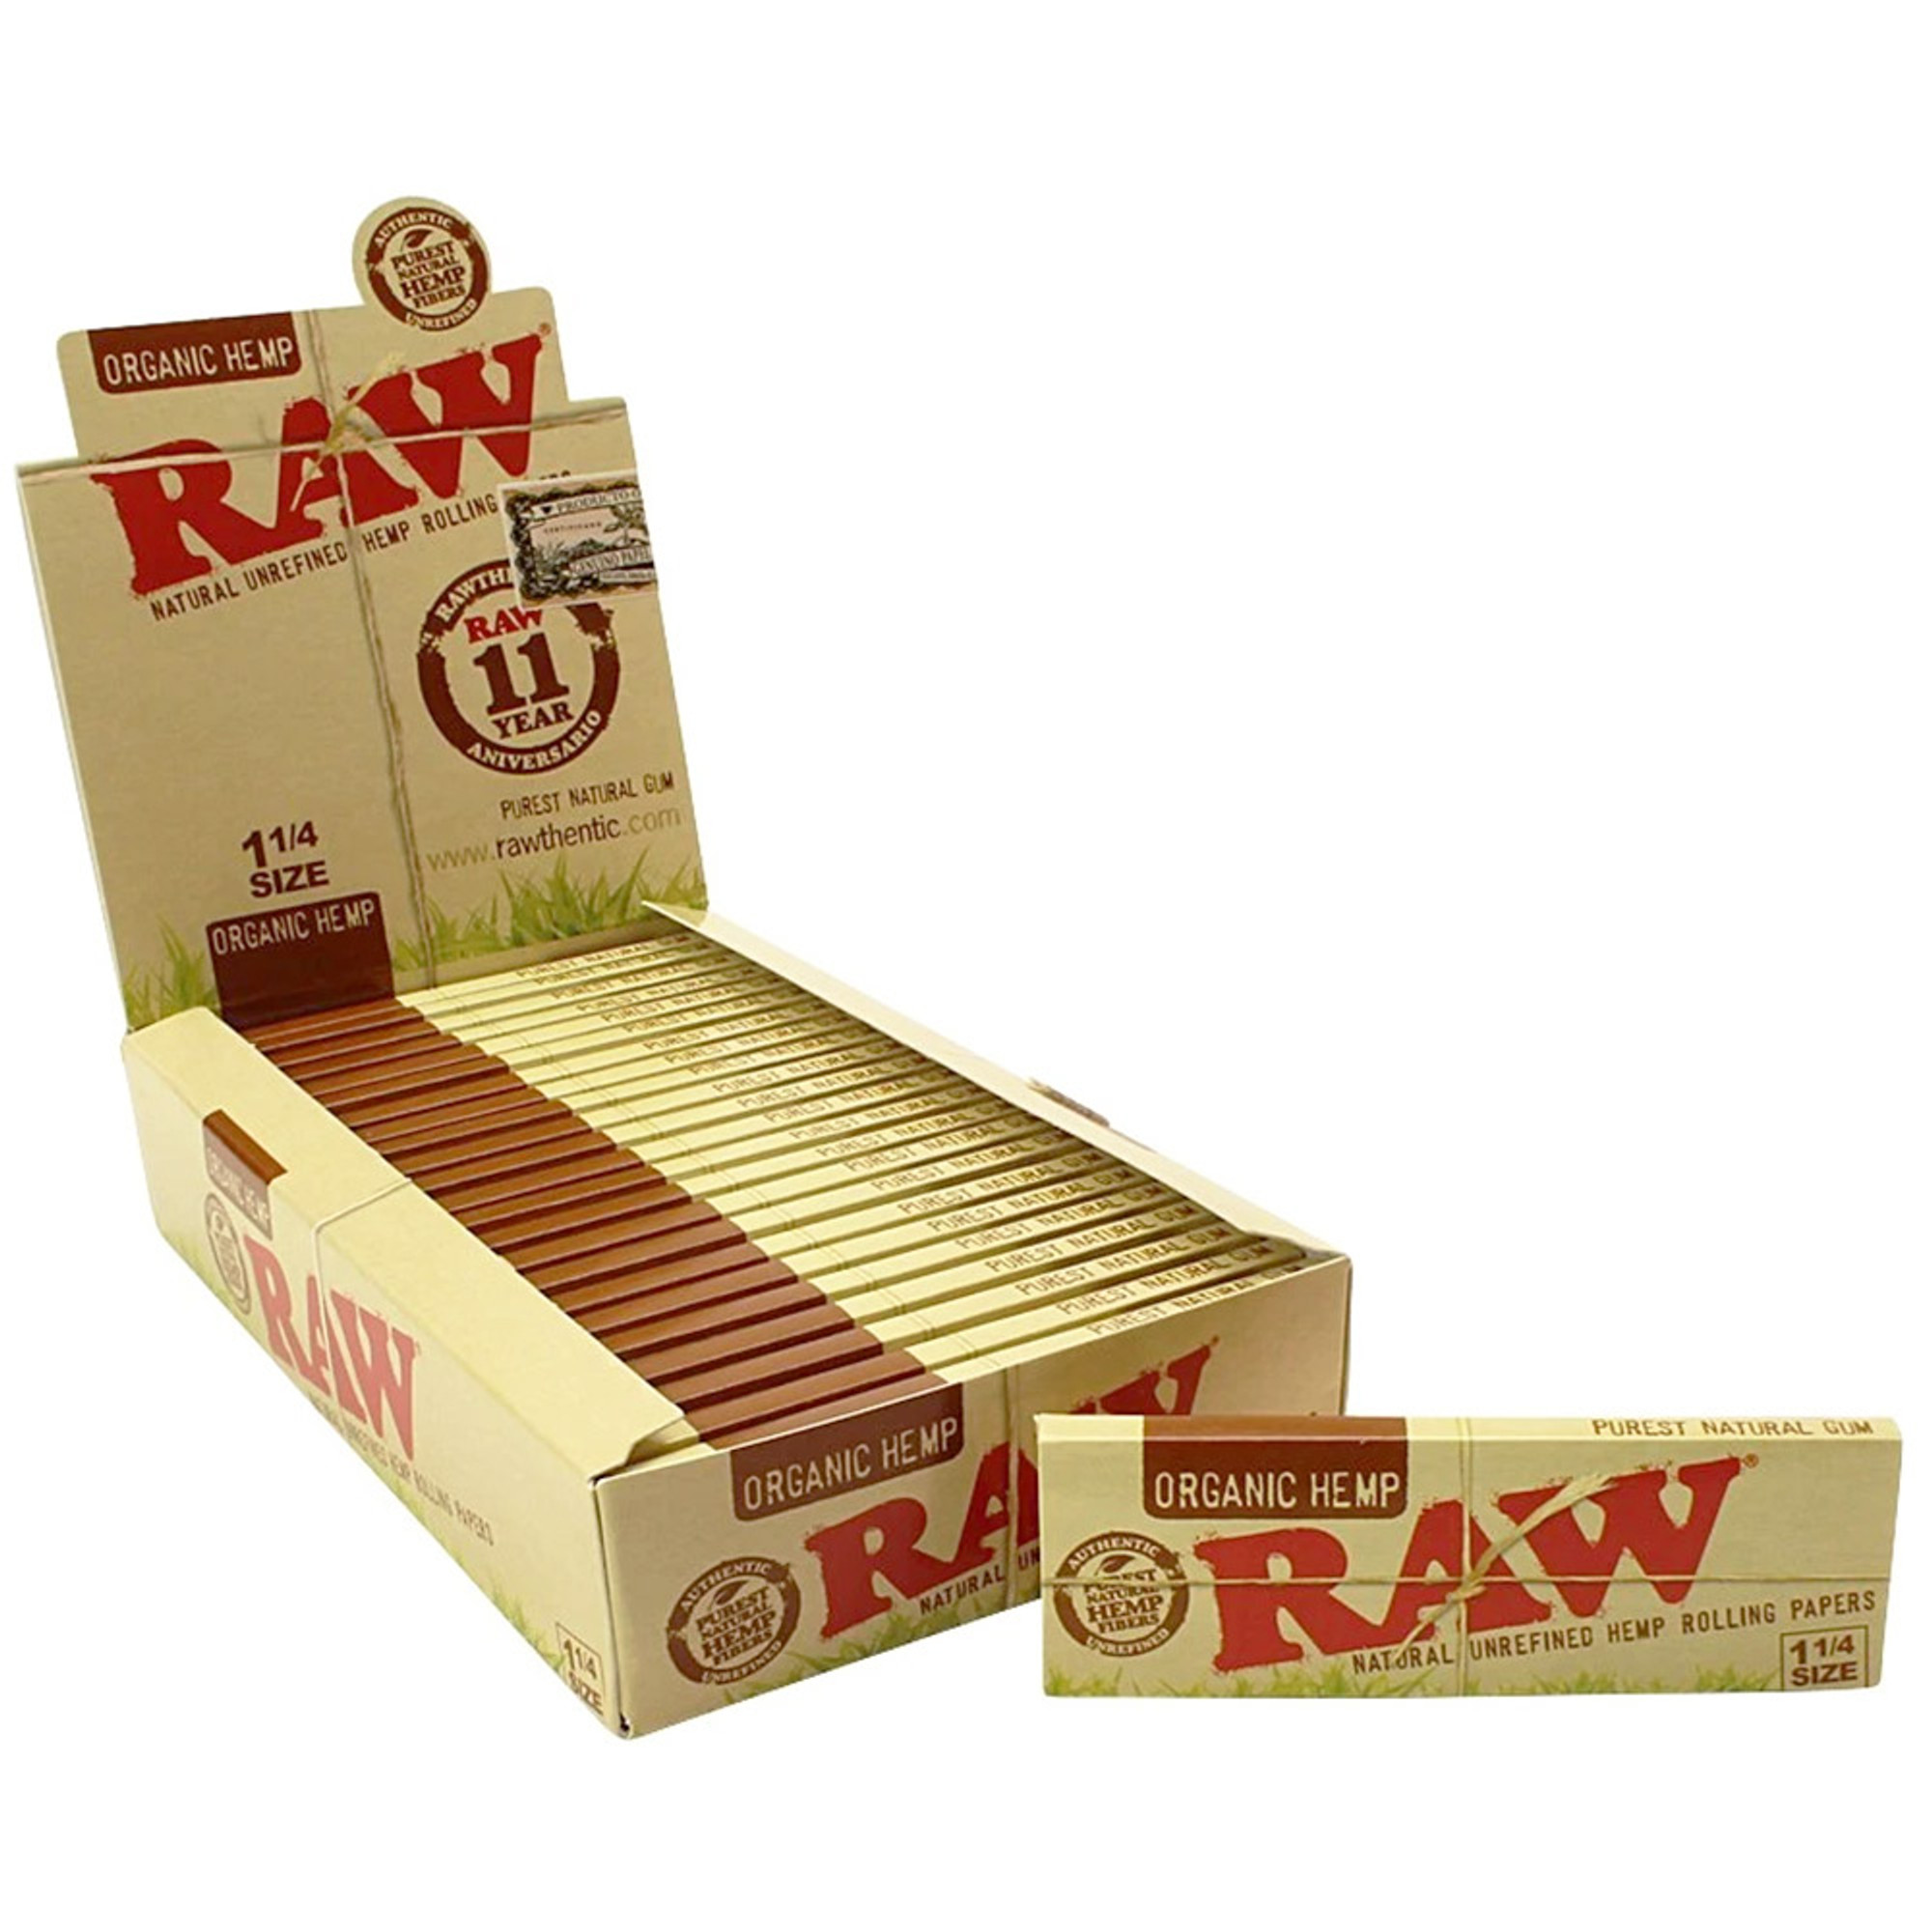 Details about   RAW Organic Hemp Natural 1.25 1 1/4 Rolling Papers 12 Booklets FREE SHIP